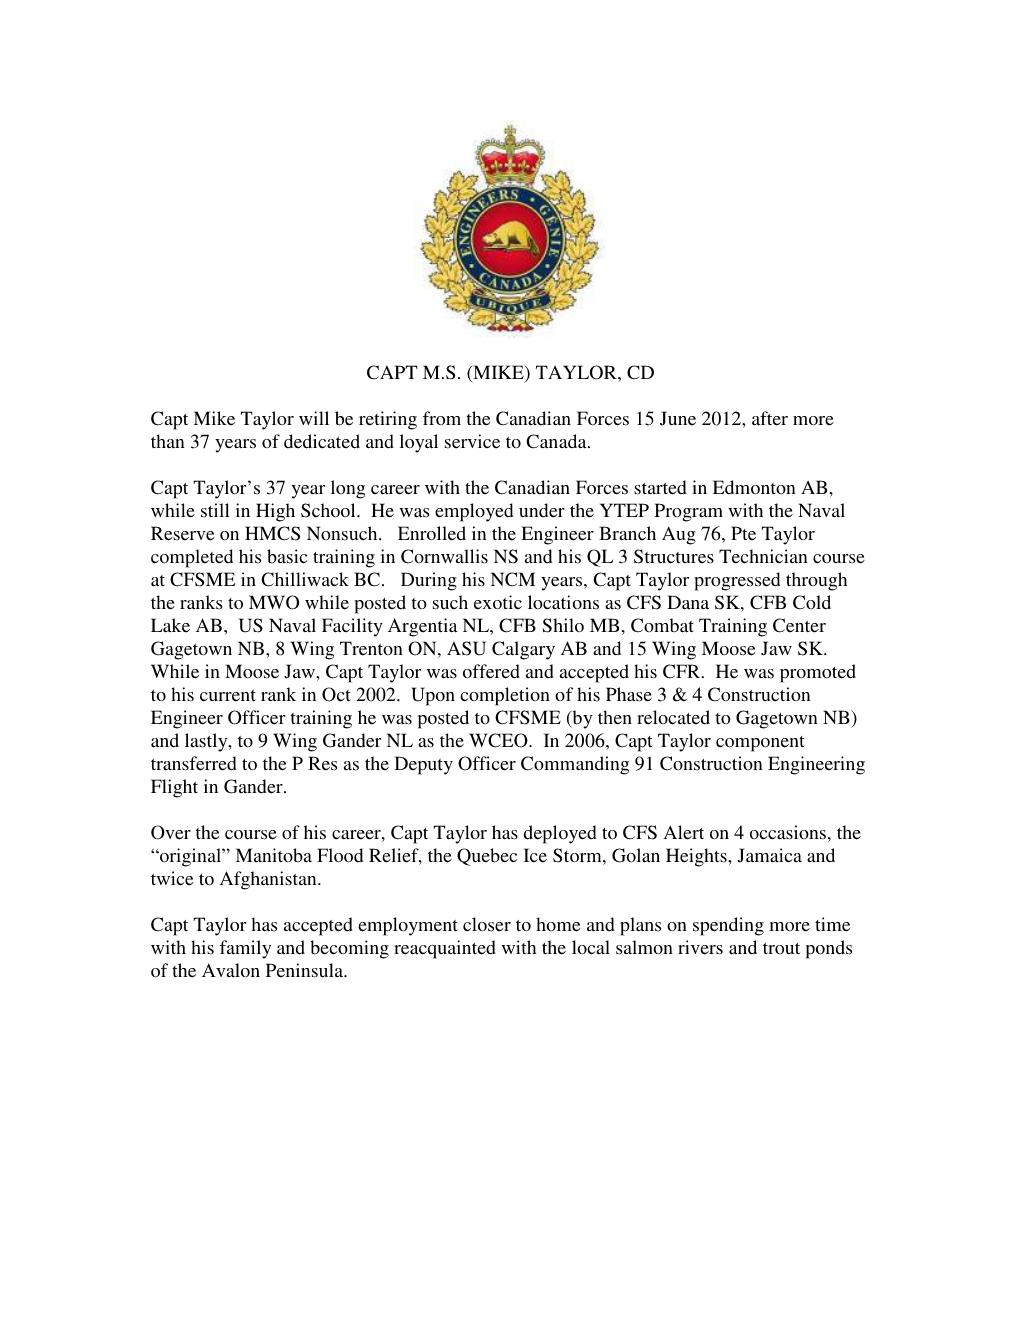 TAYLOR, CD Capt Mike Taylor Will Be Retiring from the Canadian Forces